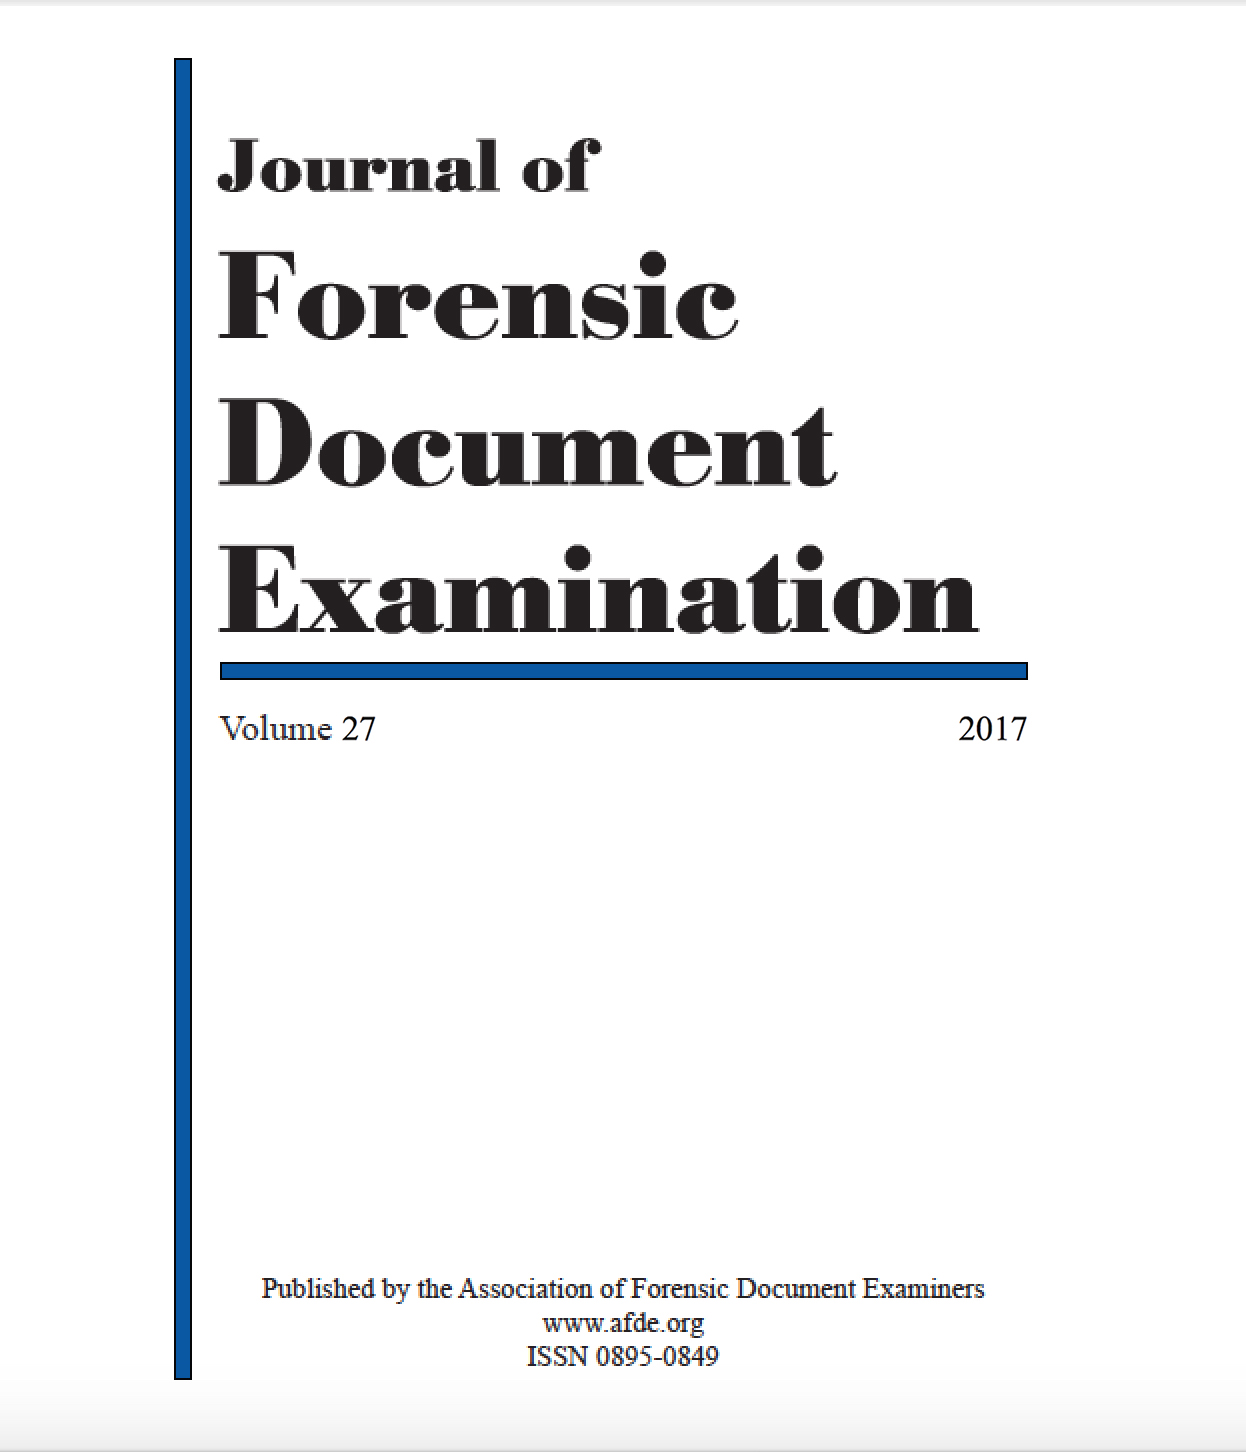 					View Vol. 27 (2017): Journal of Forensic Document Examination
				